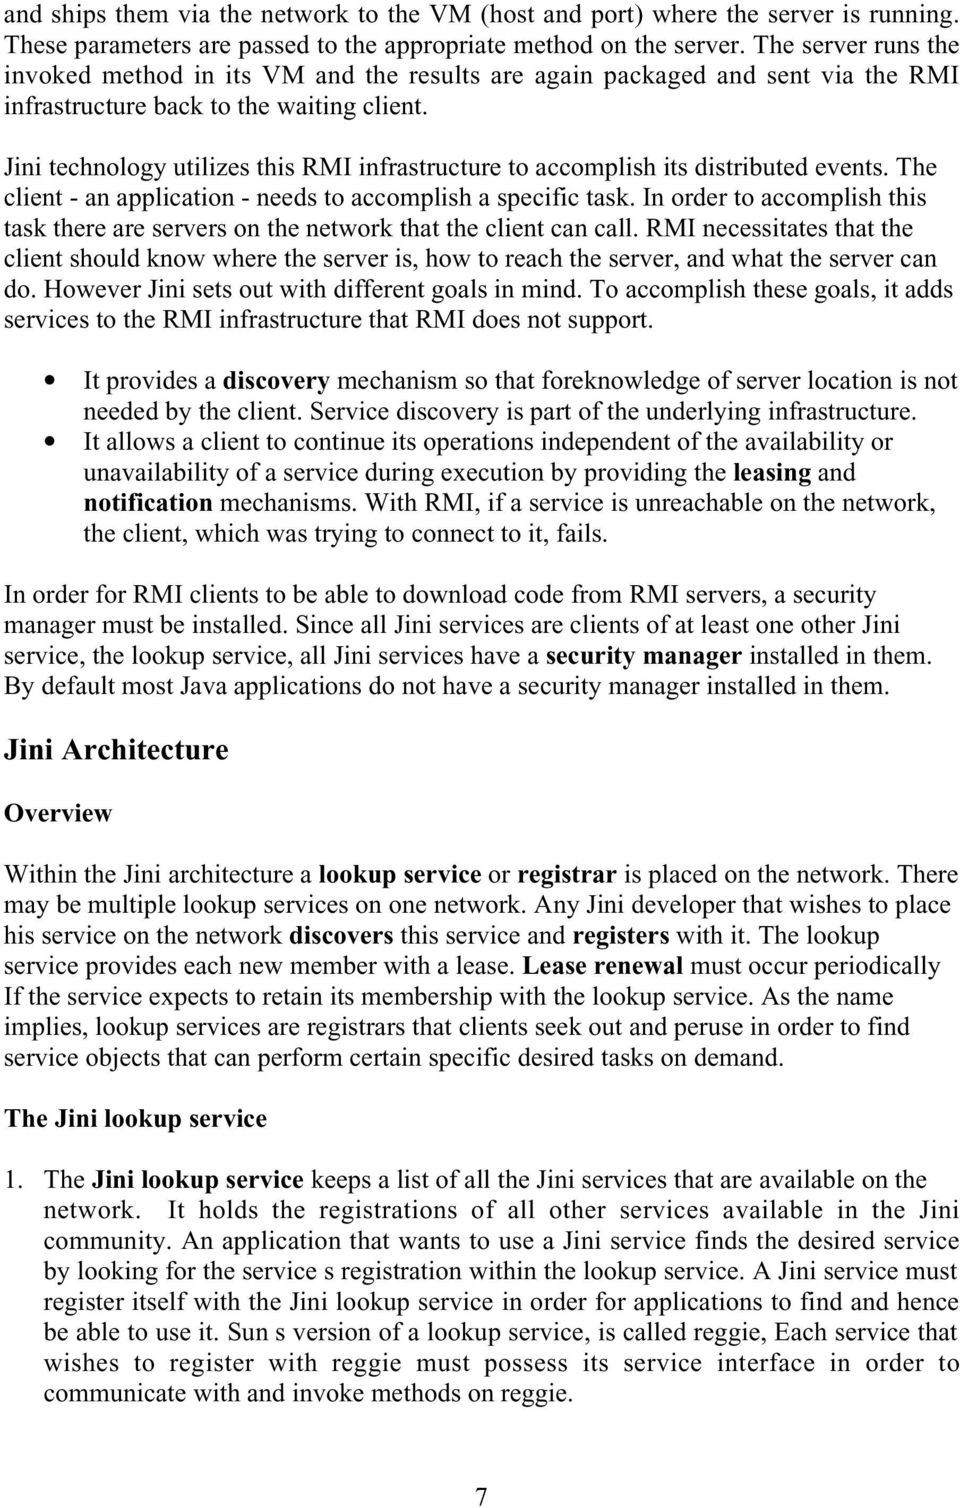 Jini technology utilizes this RMI infrastructure to accomplish its distributed events. The client - an application - needs to accomplish a specific task.